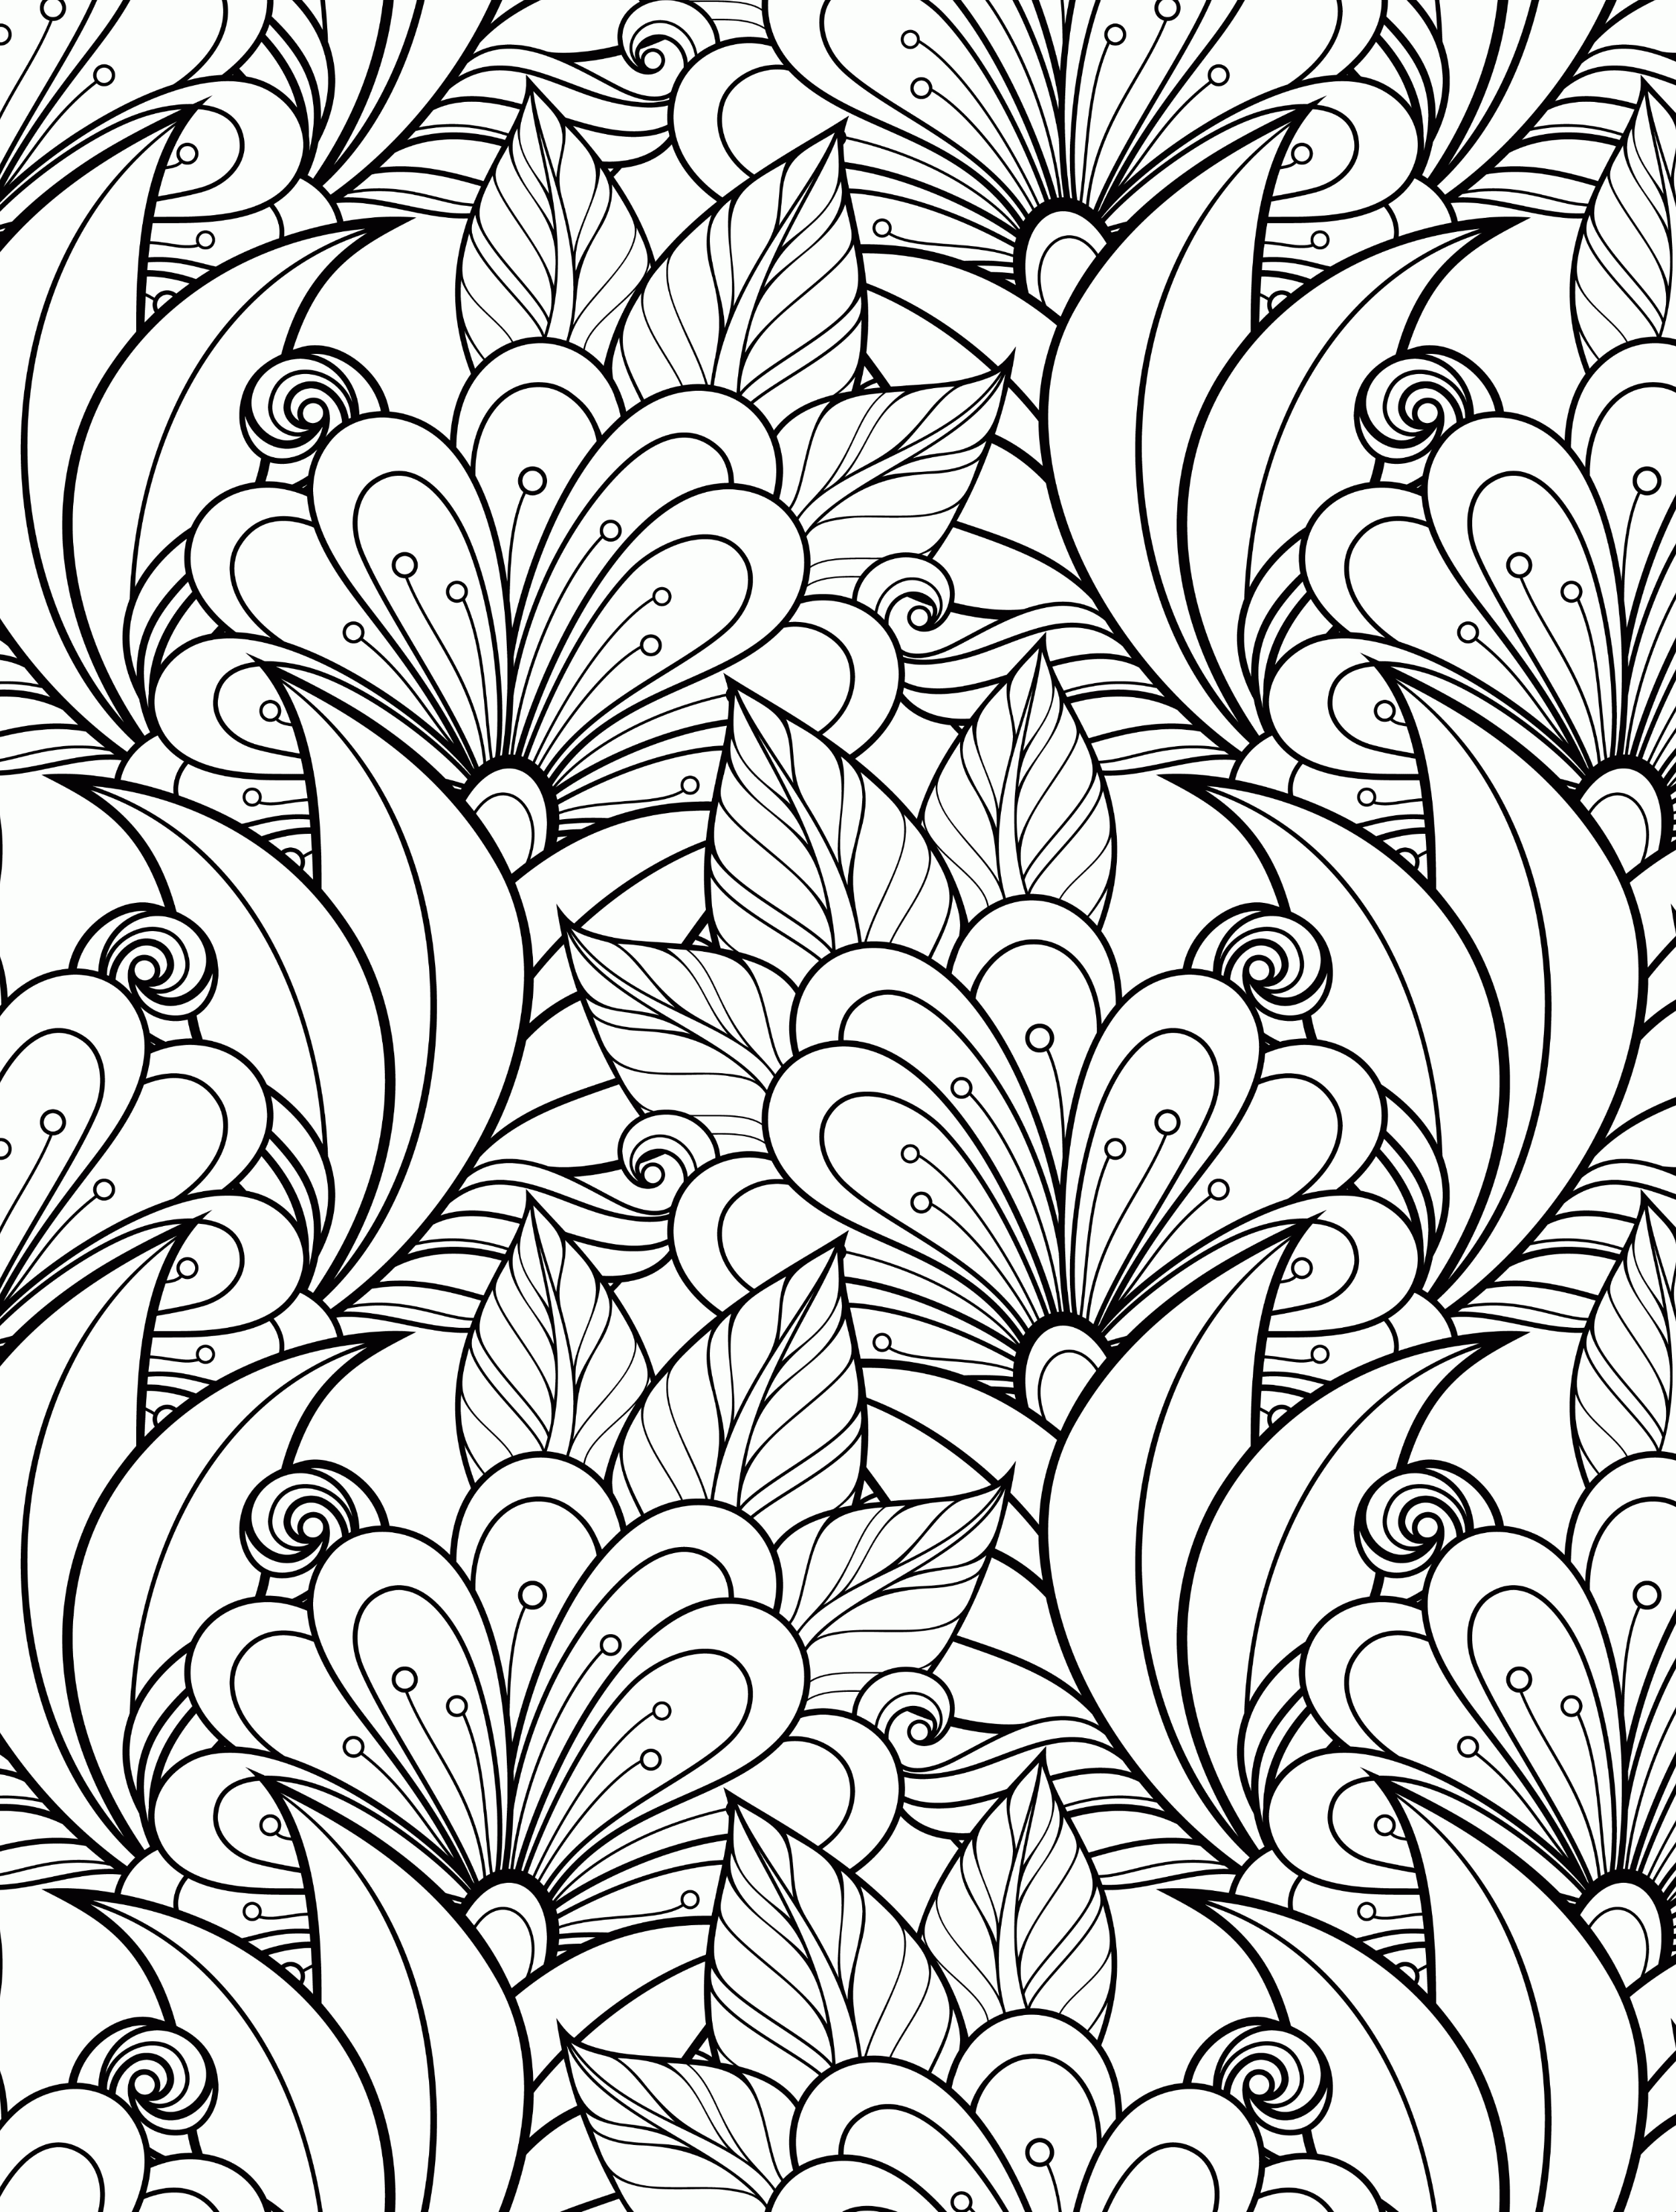 Printable Coloring Books Pdf - Coloring Pages for Kids and for Adults